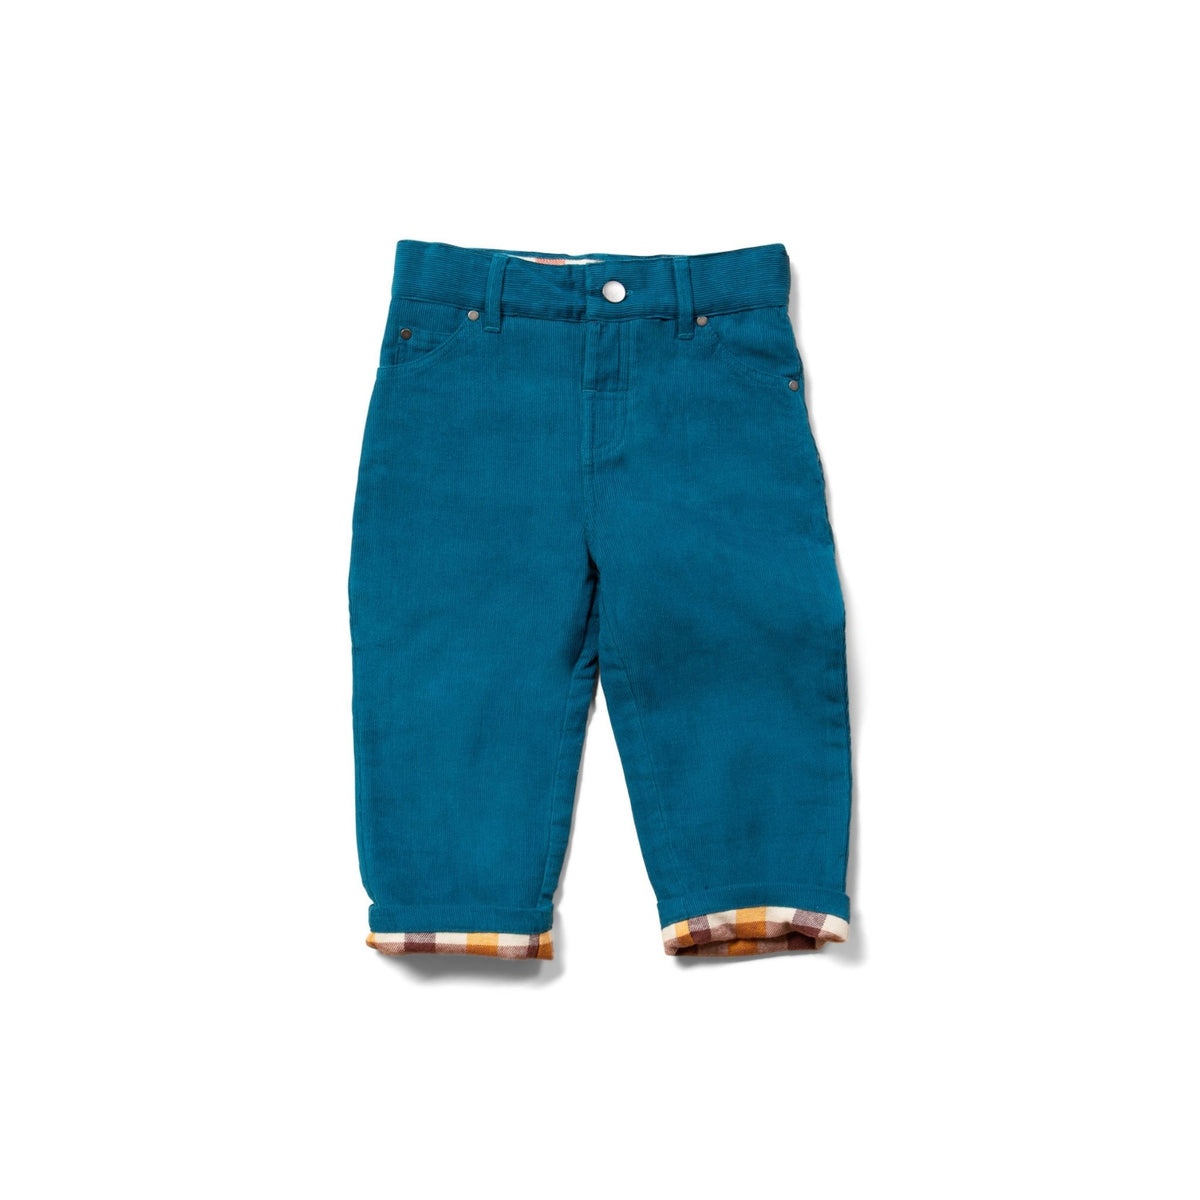 Lined Corduroy Trousers